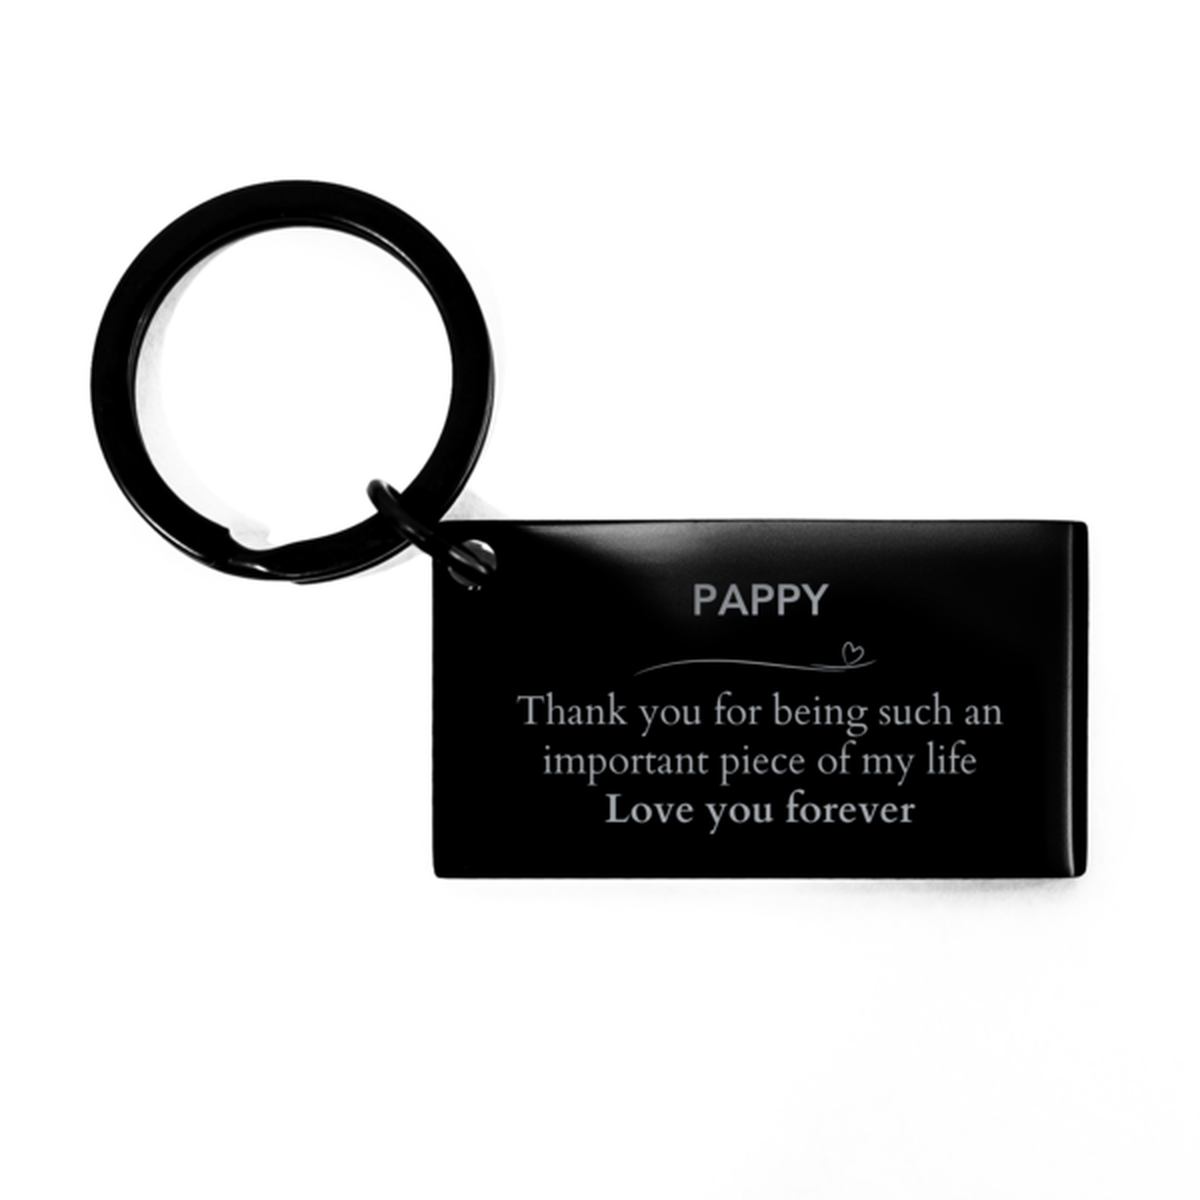 Appropriate Pappy Keychain Epic Birthday Gifts for Pappy Thank you for being such an important piece of my life Pappy Christmas Mothers Fathers Day